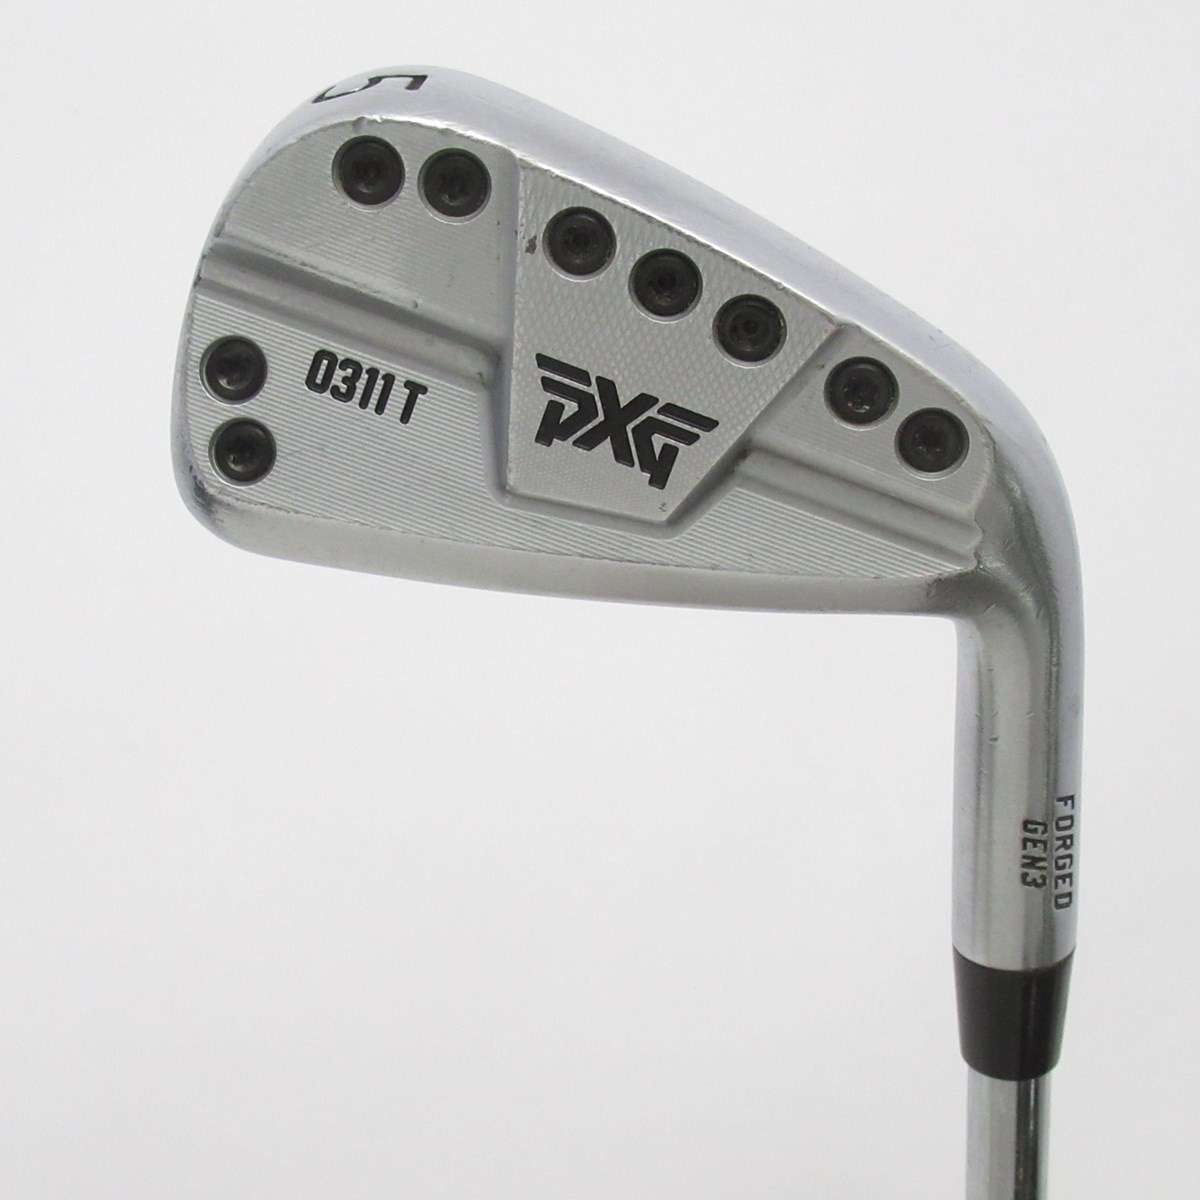 PXG 0311 T GEN3 中古アイアンセット ピーエックスジー PXG 通販｜GDO ...